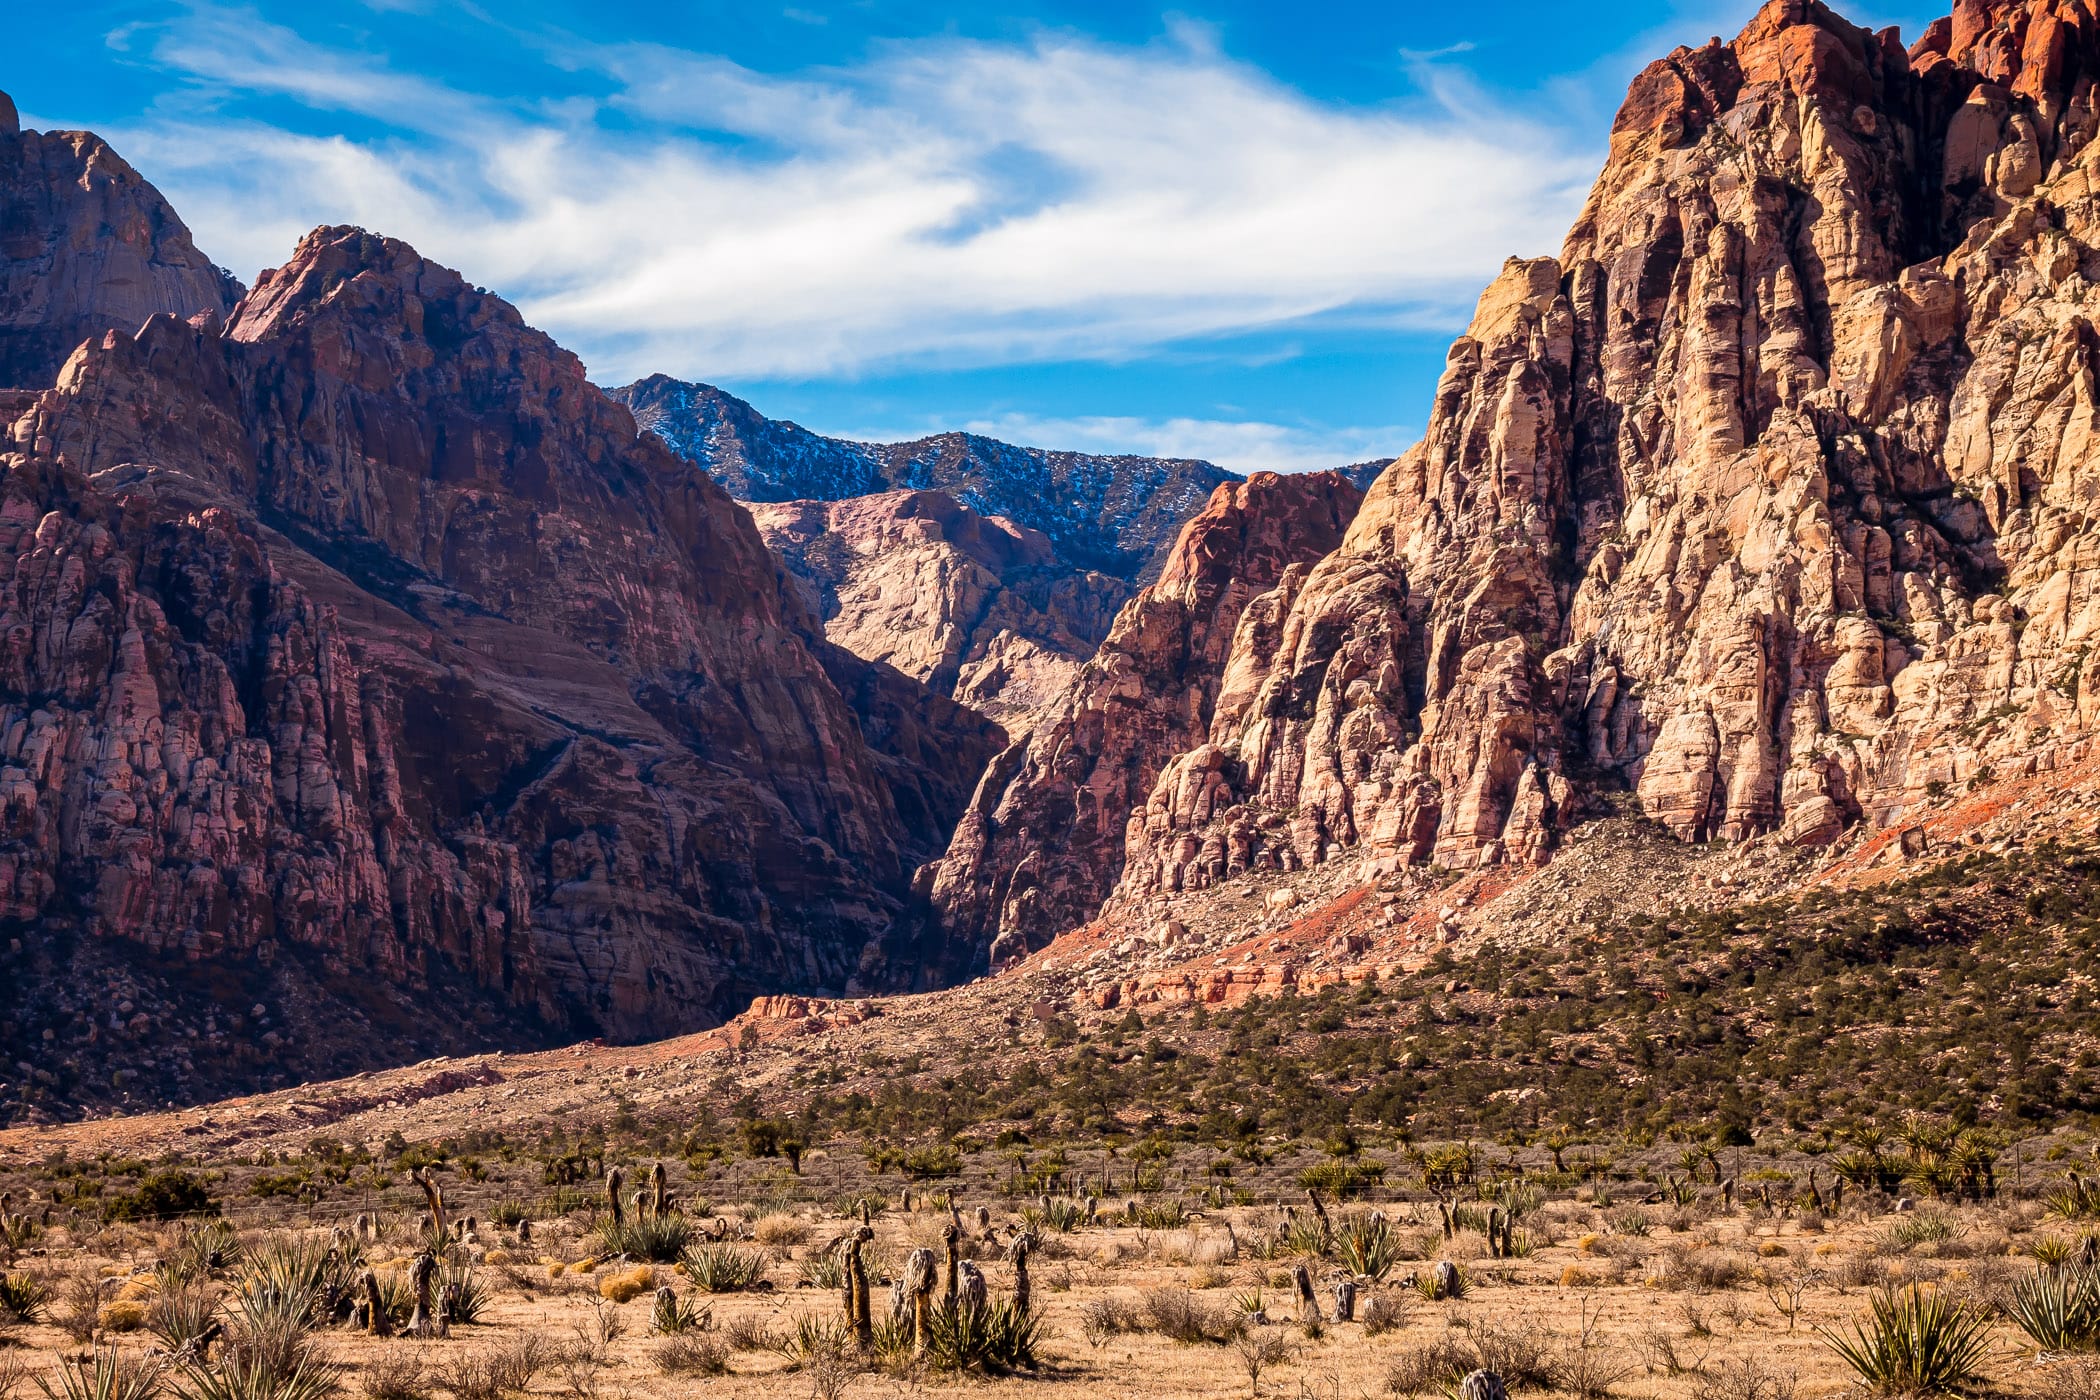 Rugged landscape rises from the desert floor in Nevada's Red Rock Canyon.